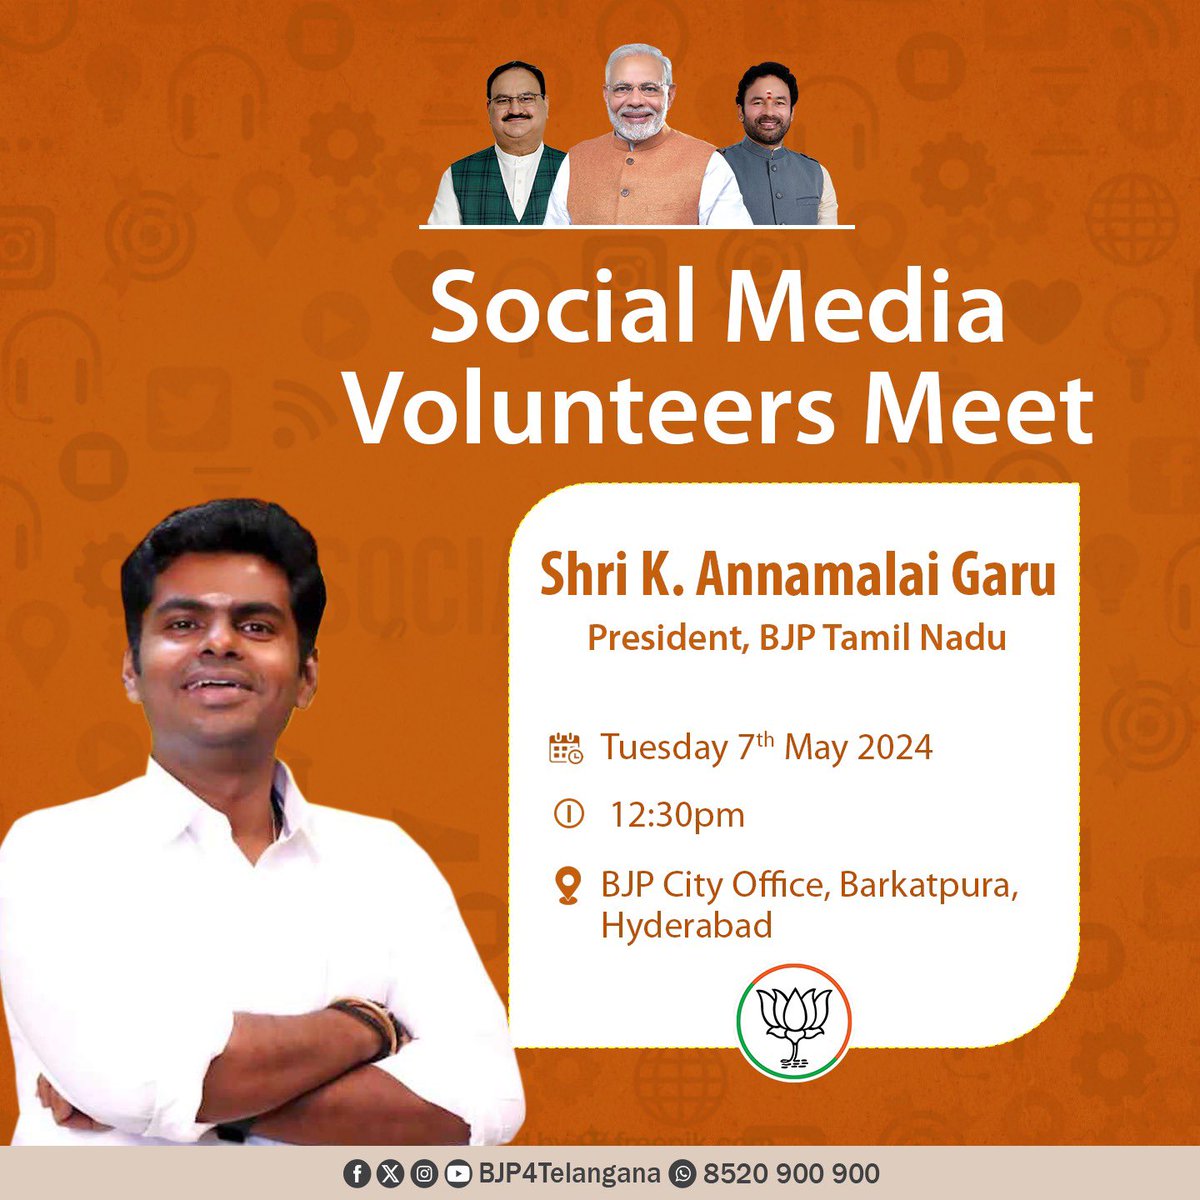 We are delighted to announce that Singham Shri @annamalai_k, President of @BJP4TamilNadu, will be engaging with Social Media Volunteers and Influencers today, May 7th, 2024.

📍 : BJP City Office, Barkatpura
🕧 : 12:30 pm

Join us for an insightful interaction!